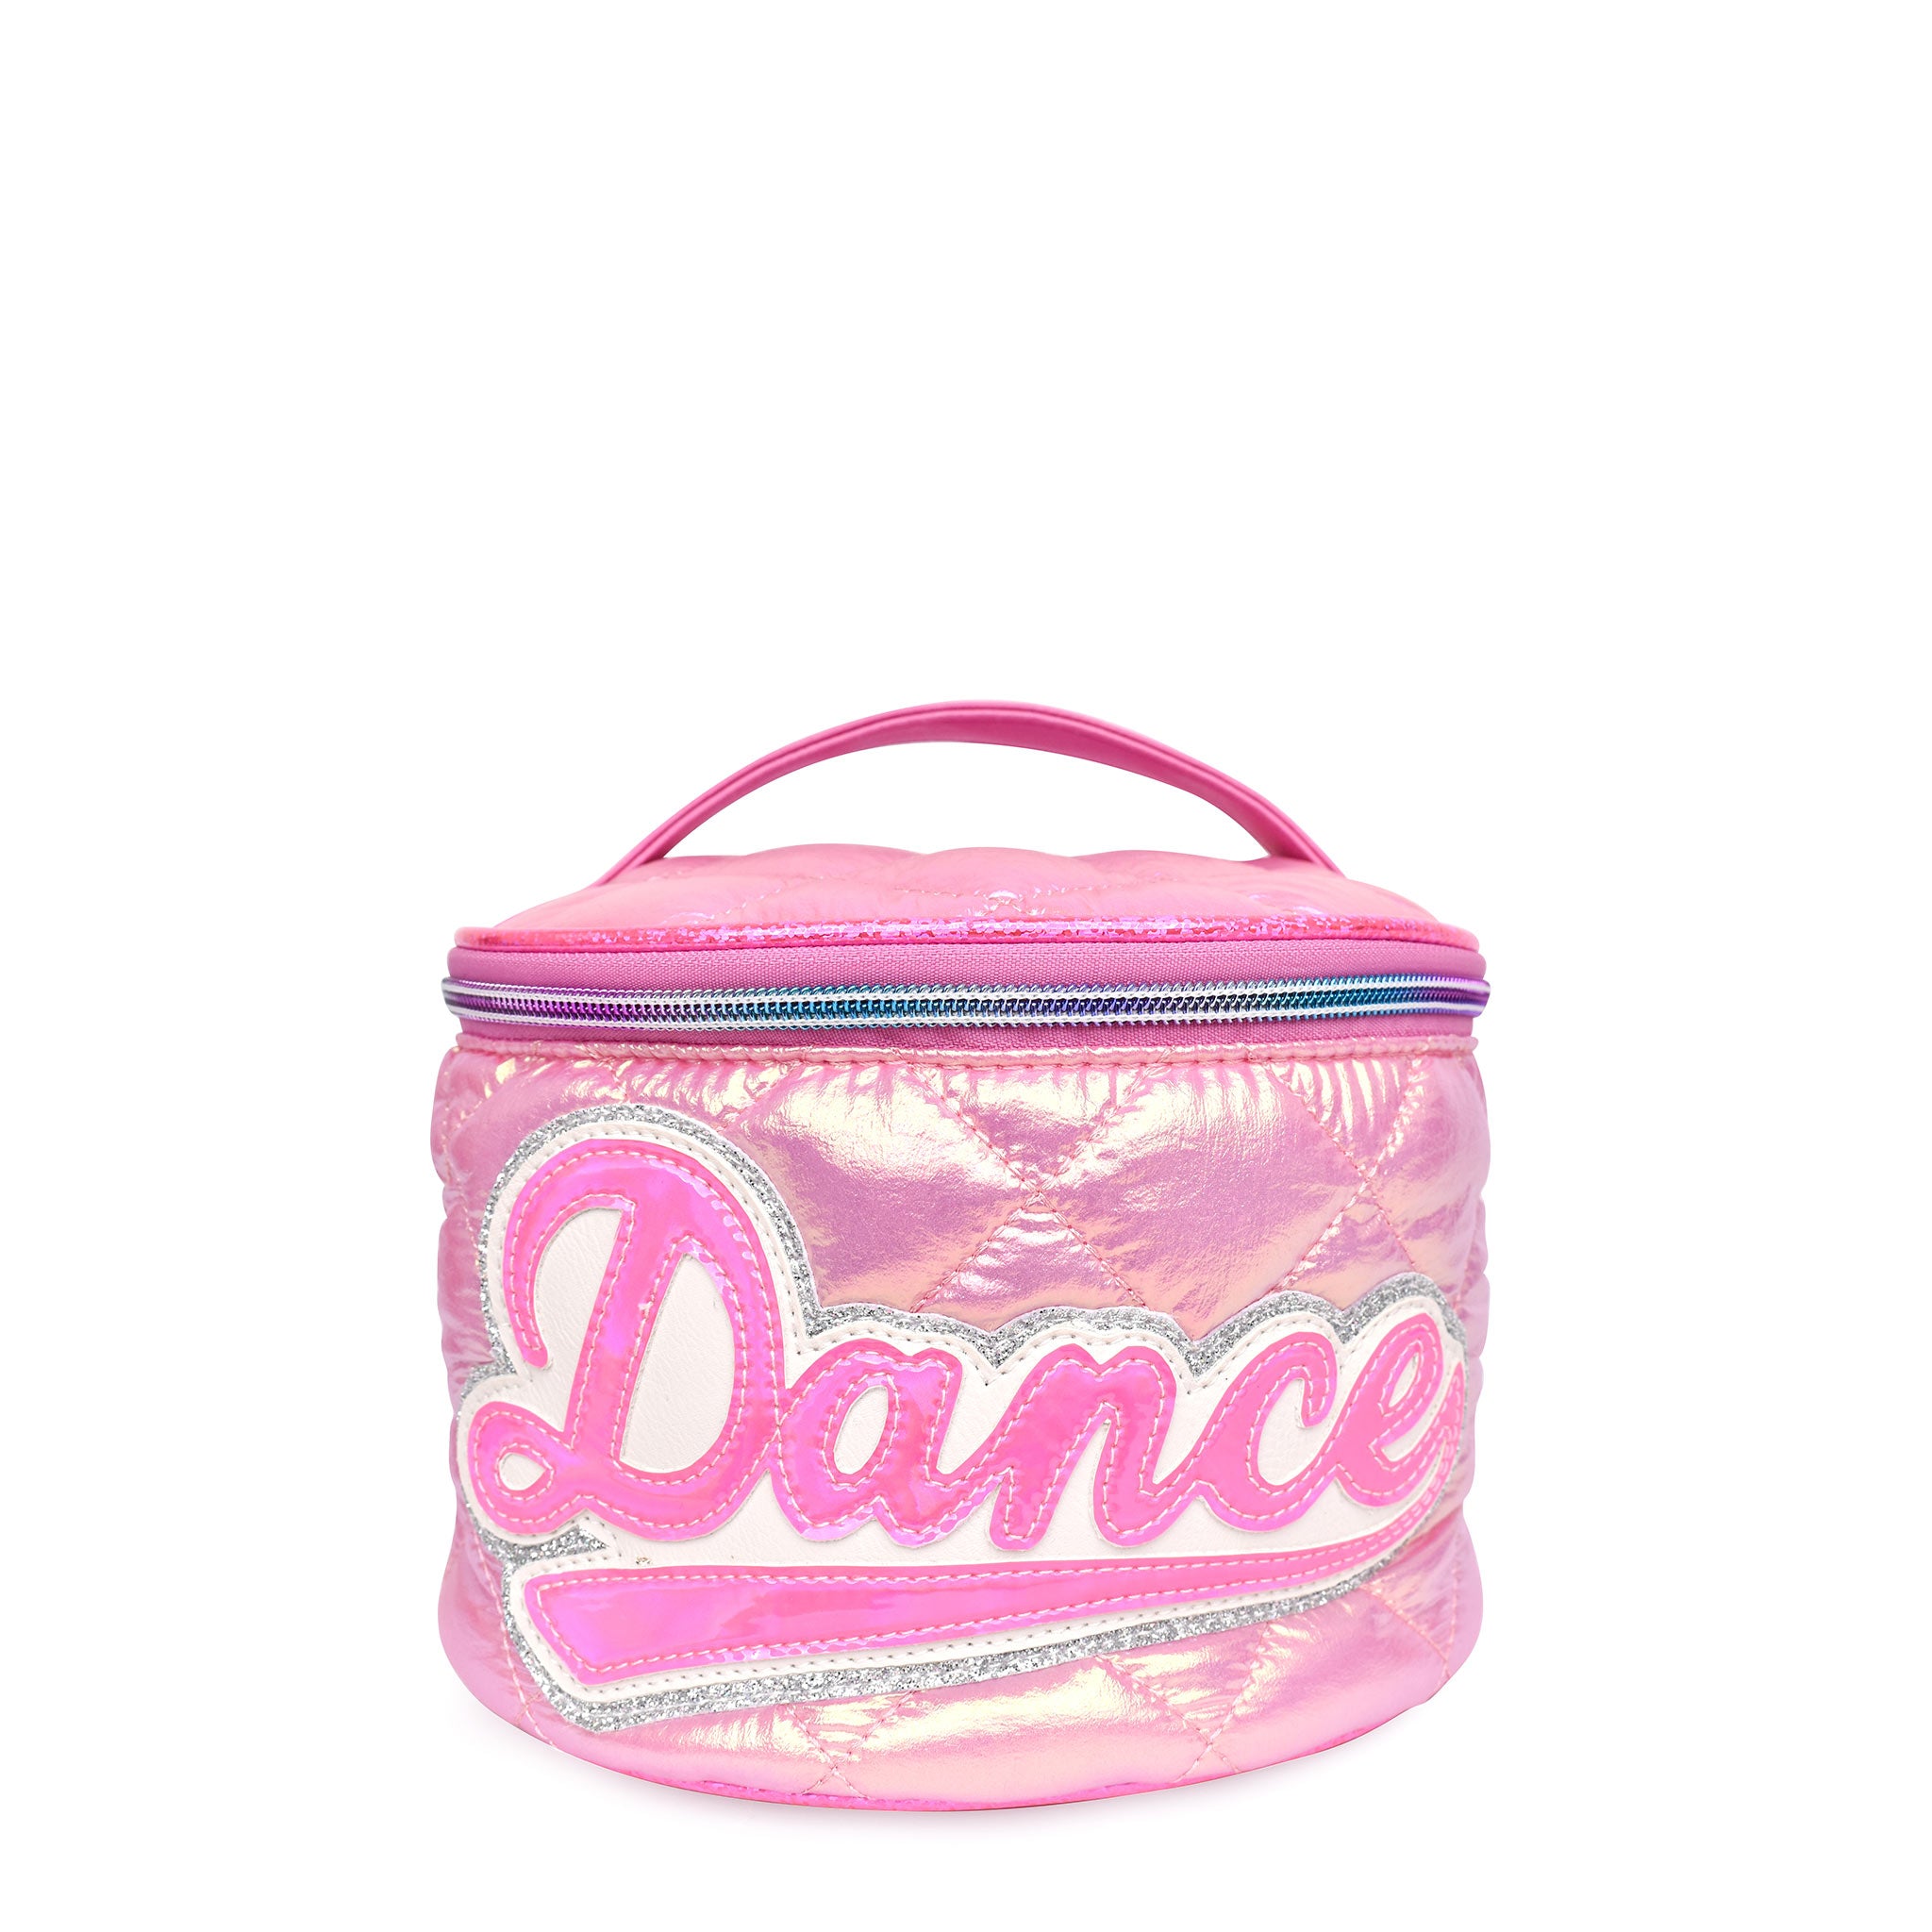 Front view of pink puffer metallic 'Dance' glam bag